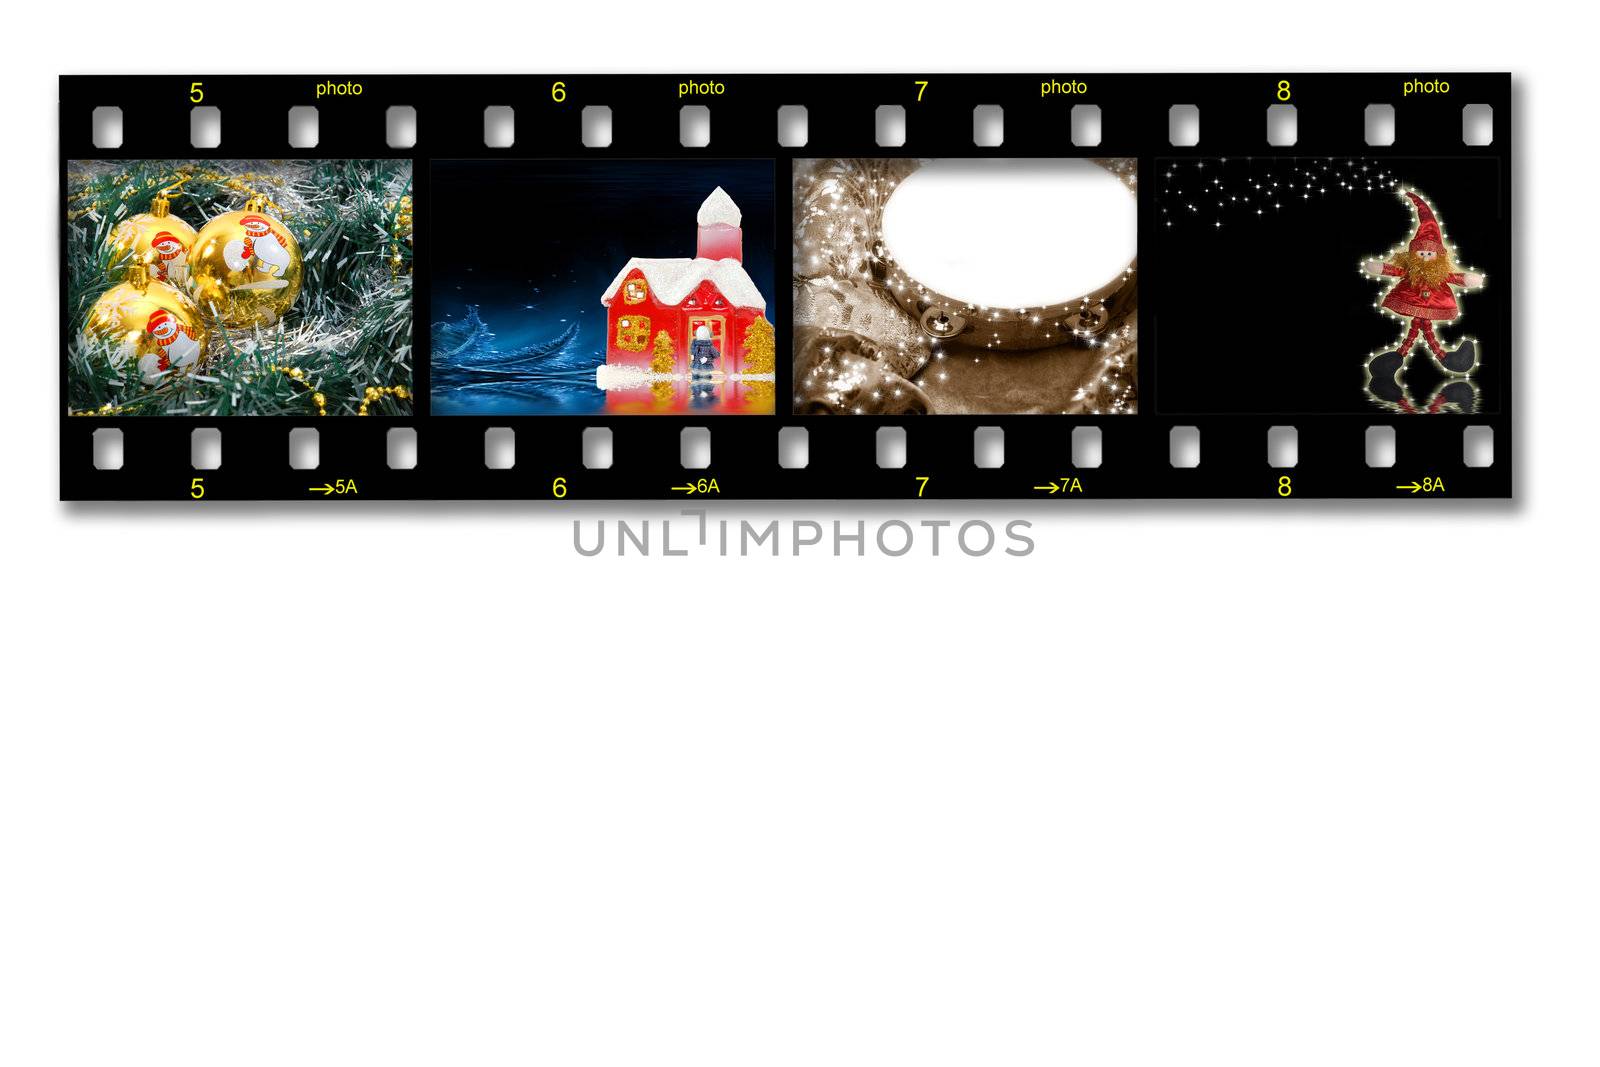 35mm slide film with Christmas photos by Carche